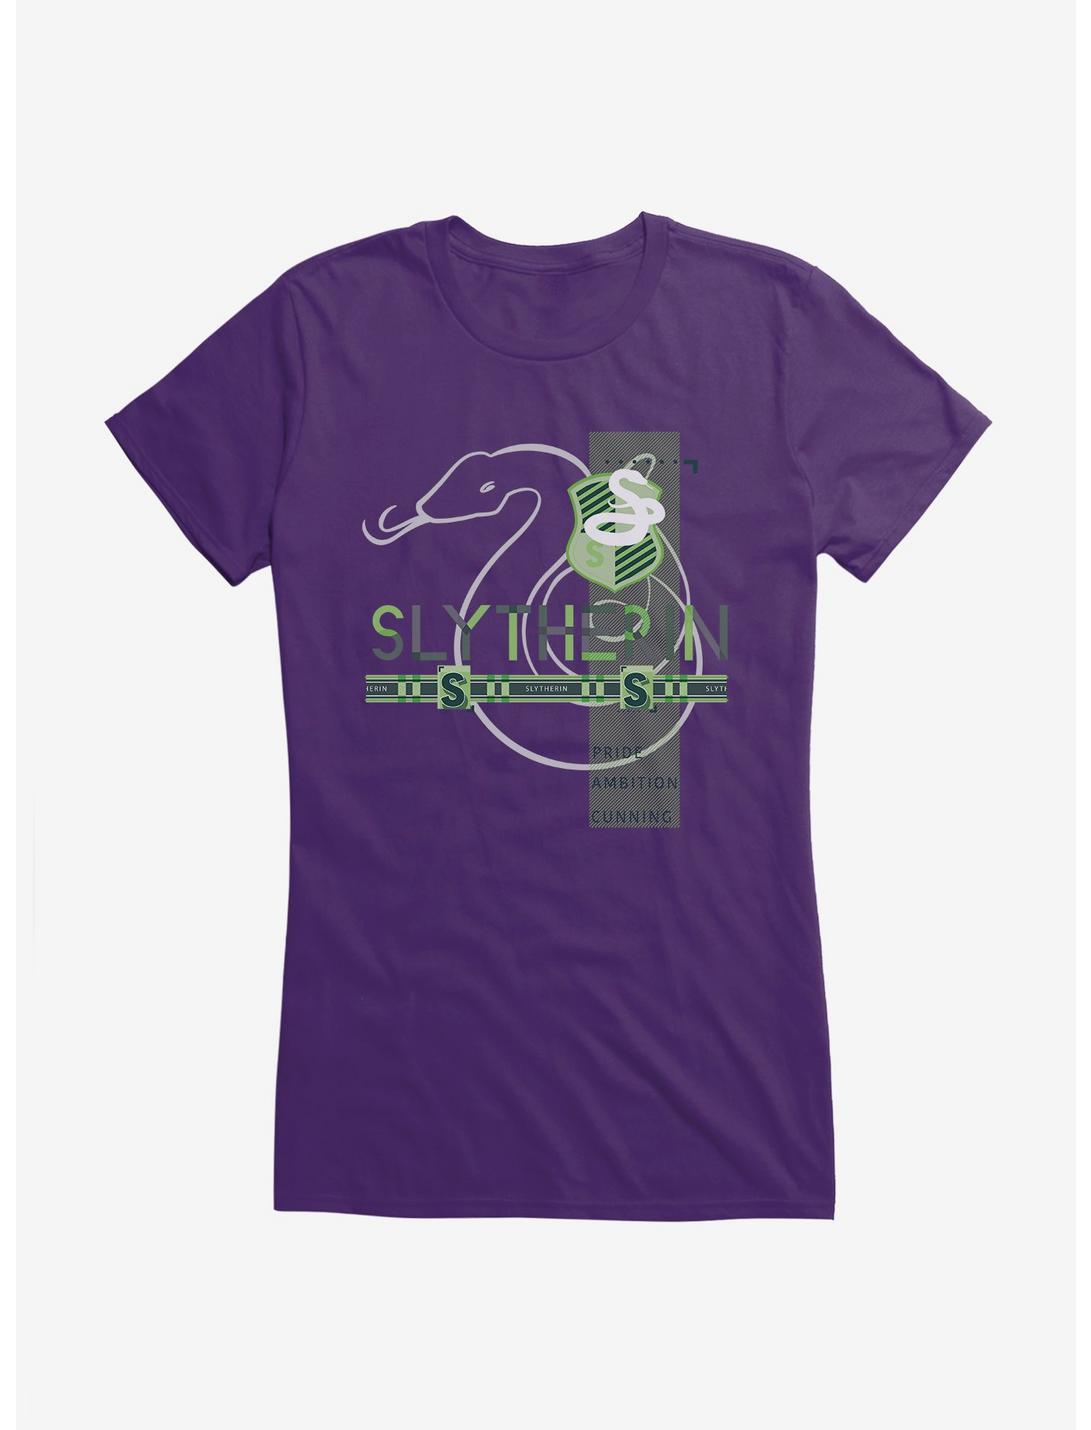 Harry Potter Slytherin Icons Girls T-Shirt, PURPLE, hi-res